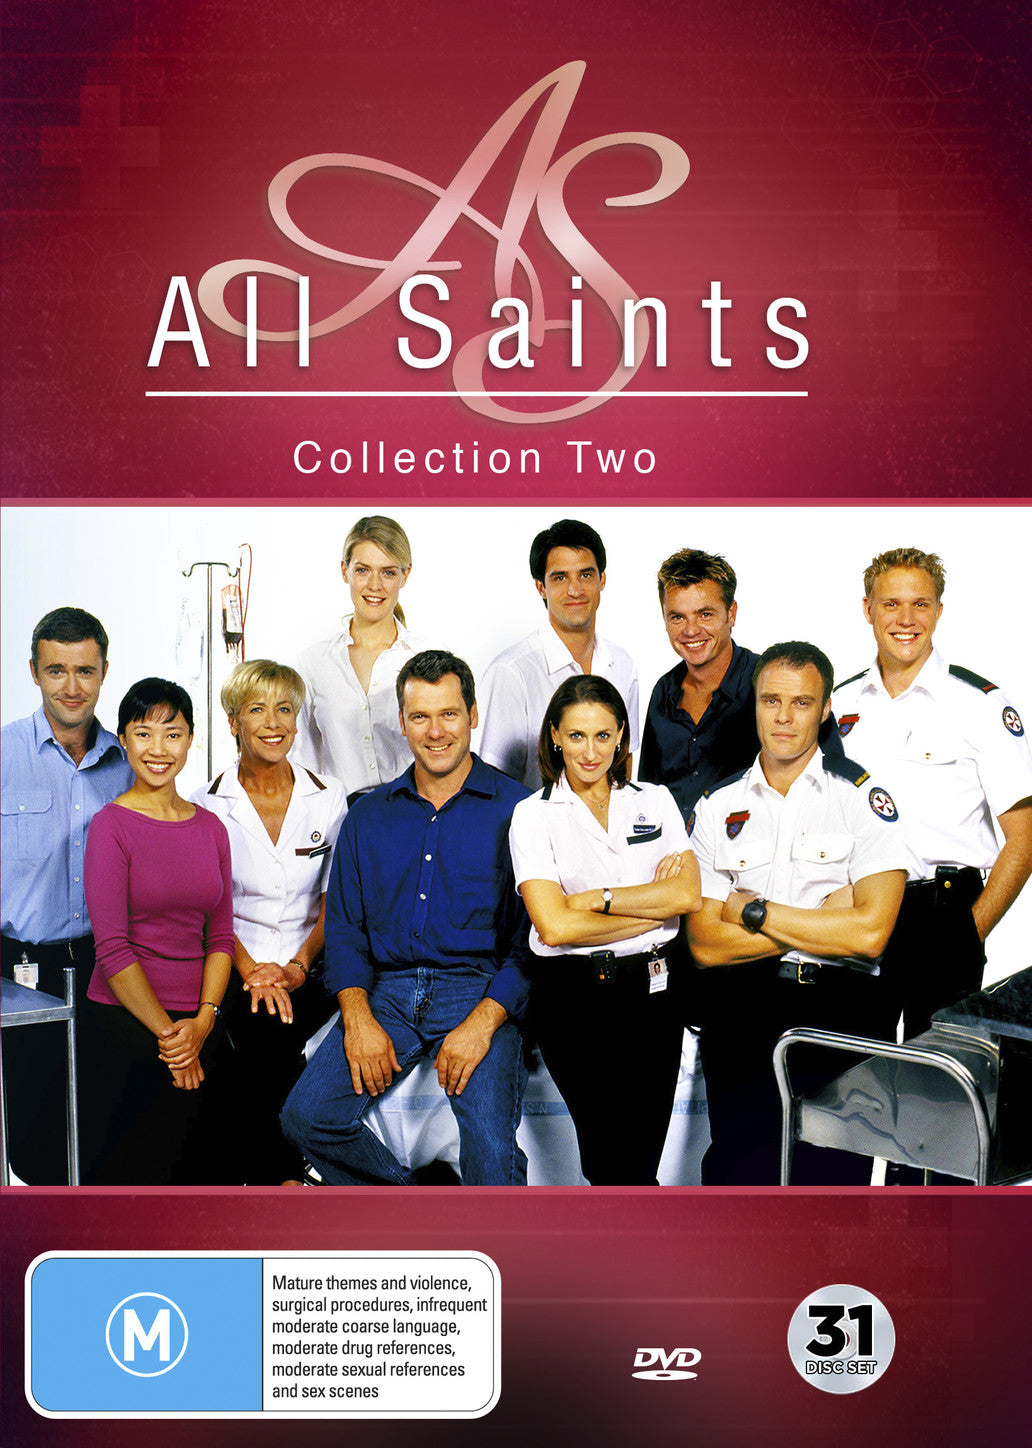 ALL SAINTS COLLECTION TWO